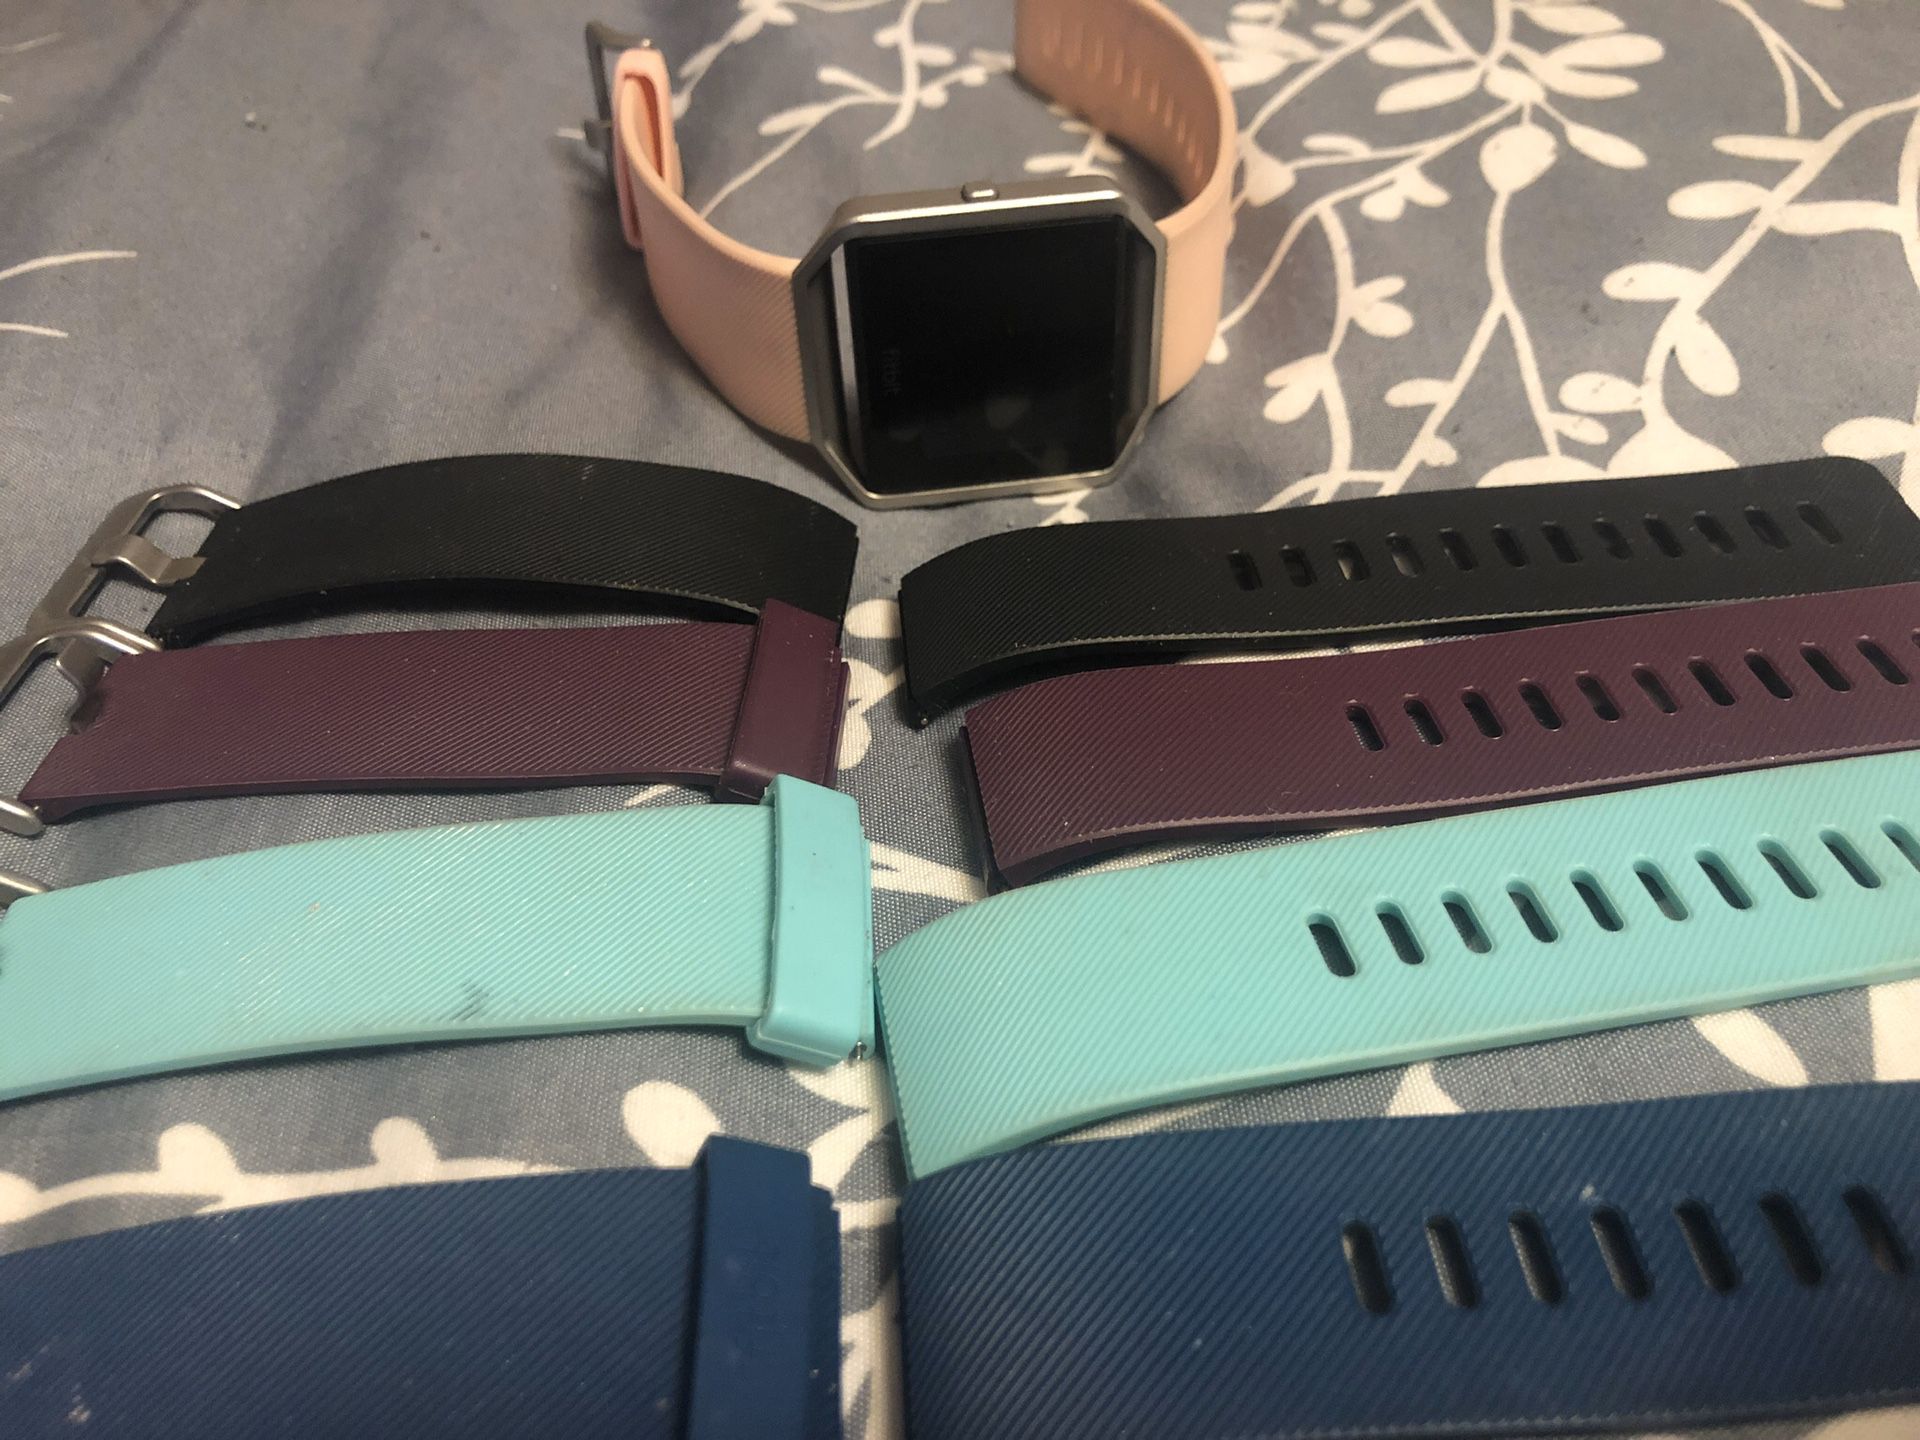 Fitbit Blaze- comes with several bands in excellent condition